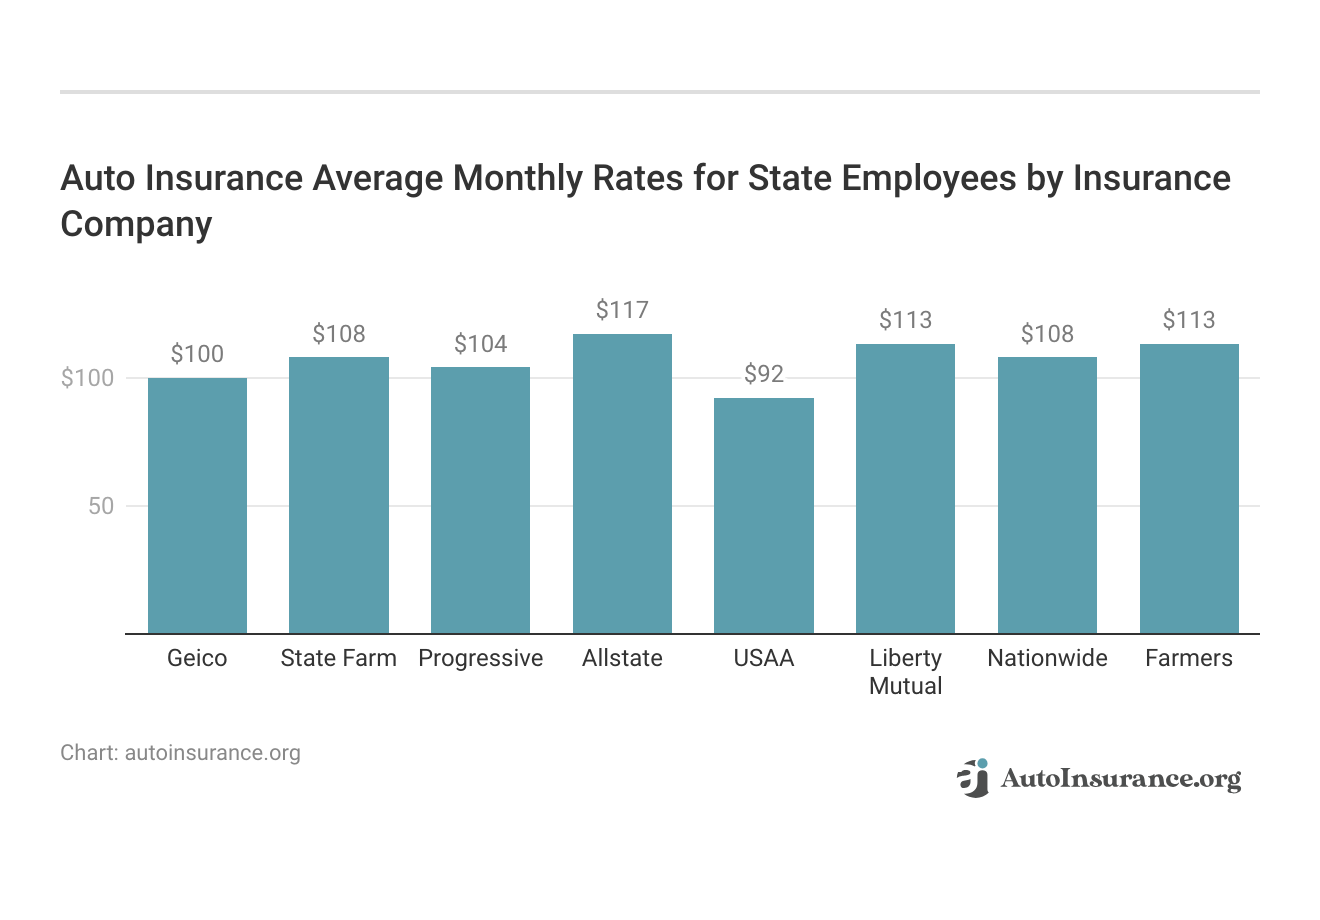 <h3>Auto Insurance Average Monthly Rates for State Employees by Insurance Company</h3>